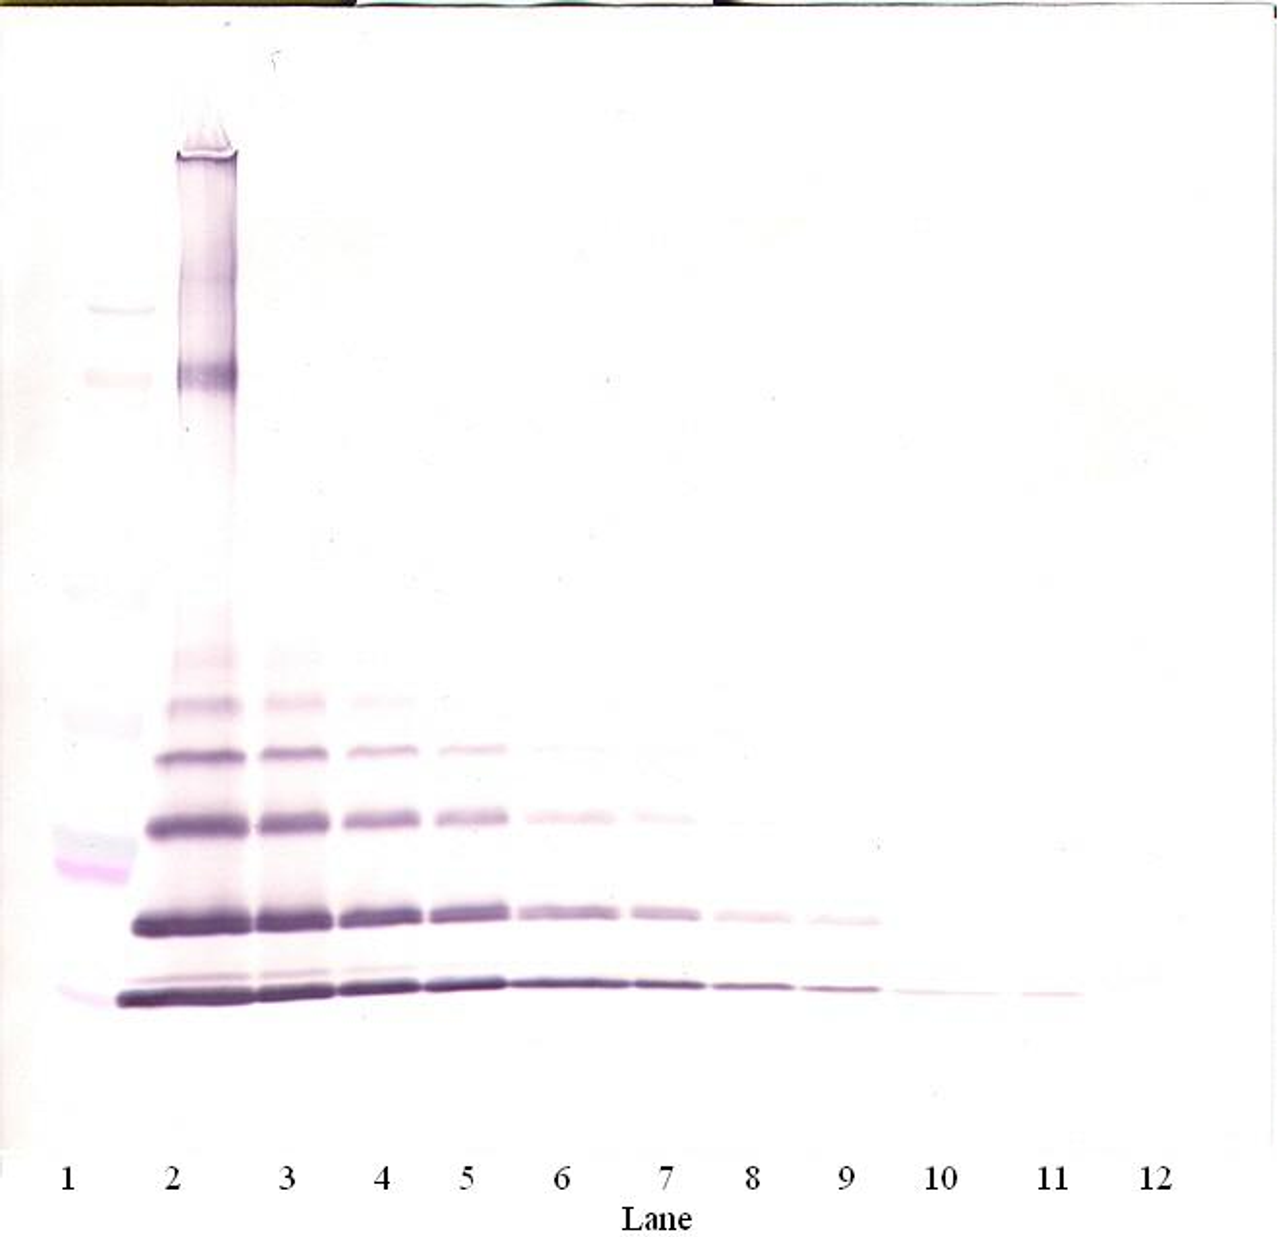 To detect mMCP-2 by Western Blot analysis this antibody can be used at a concentration of 0.1 - 0.2 ug/ml. Used in conjunction with compatible secondary reagents the detection limit for recombinant mMCP-2 is 1.5 - 3.0 ng/lane, under either reducing or non-reducing conditions.